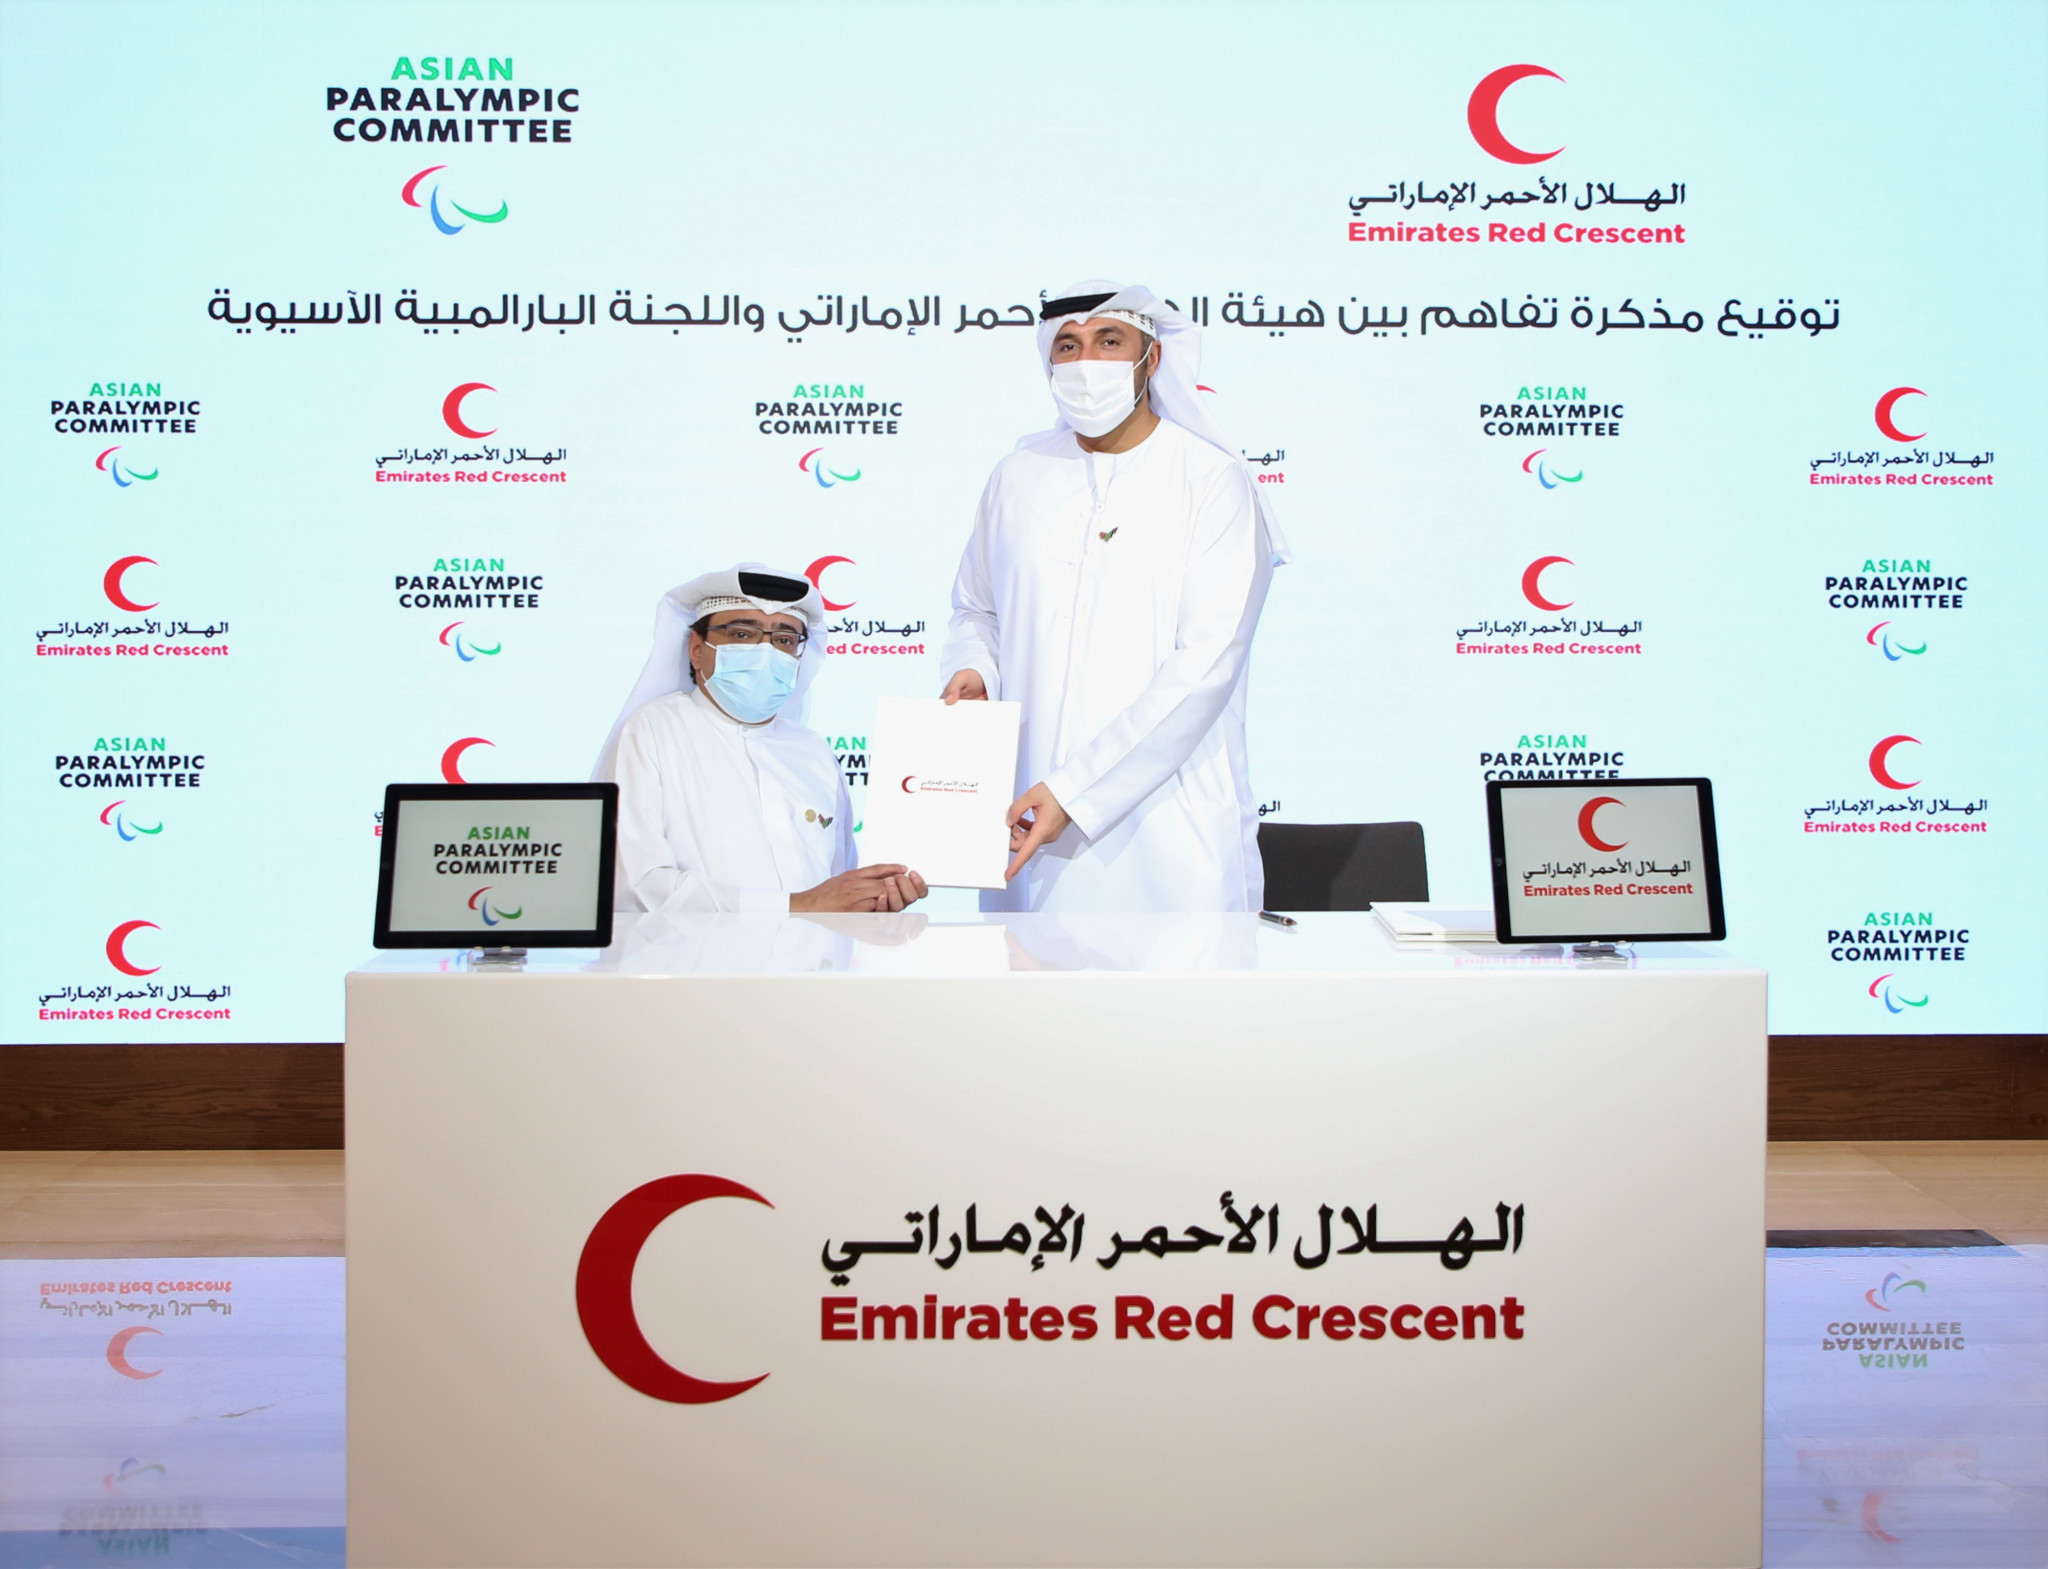 The Asian Paralympic Committee and Emirates Red Crescent are to work together ©APC